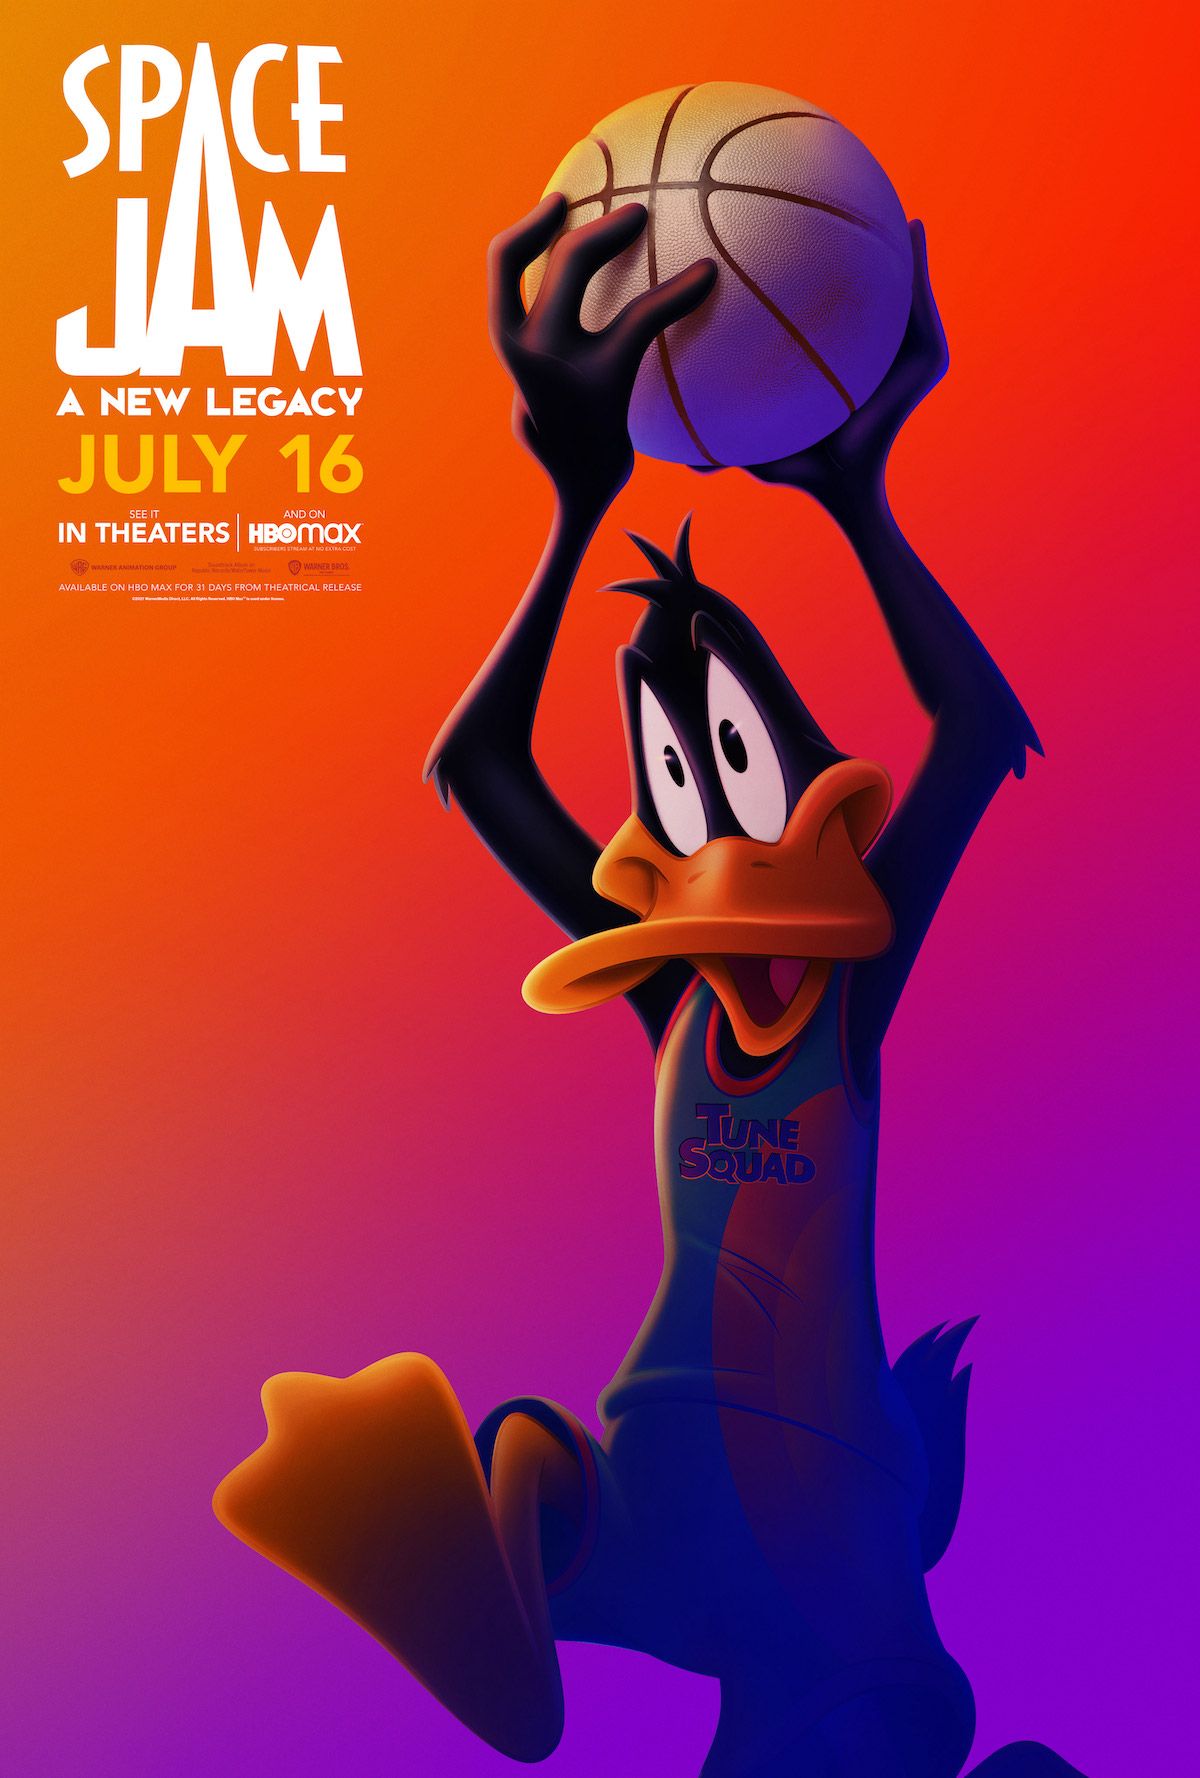 Daffy Duck Space Jam 2: A New Legacy character poster